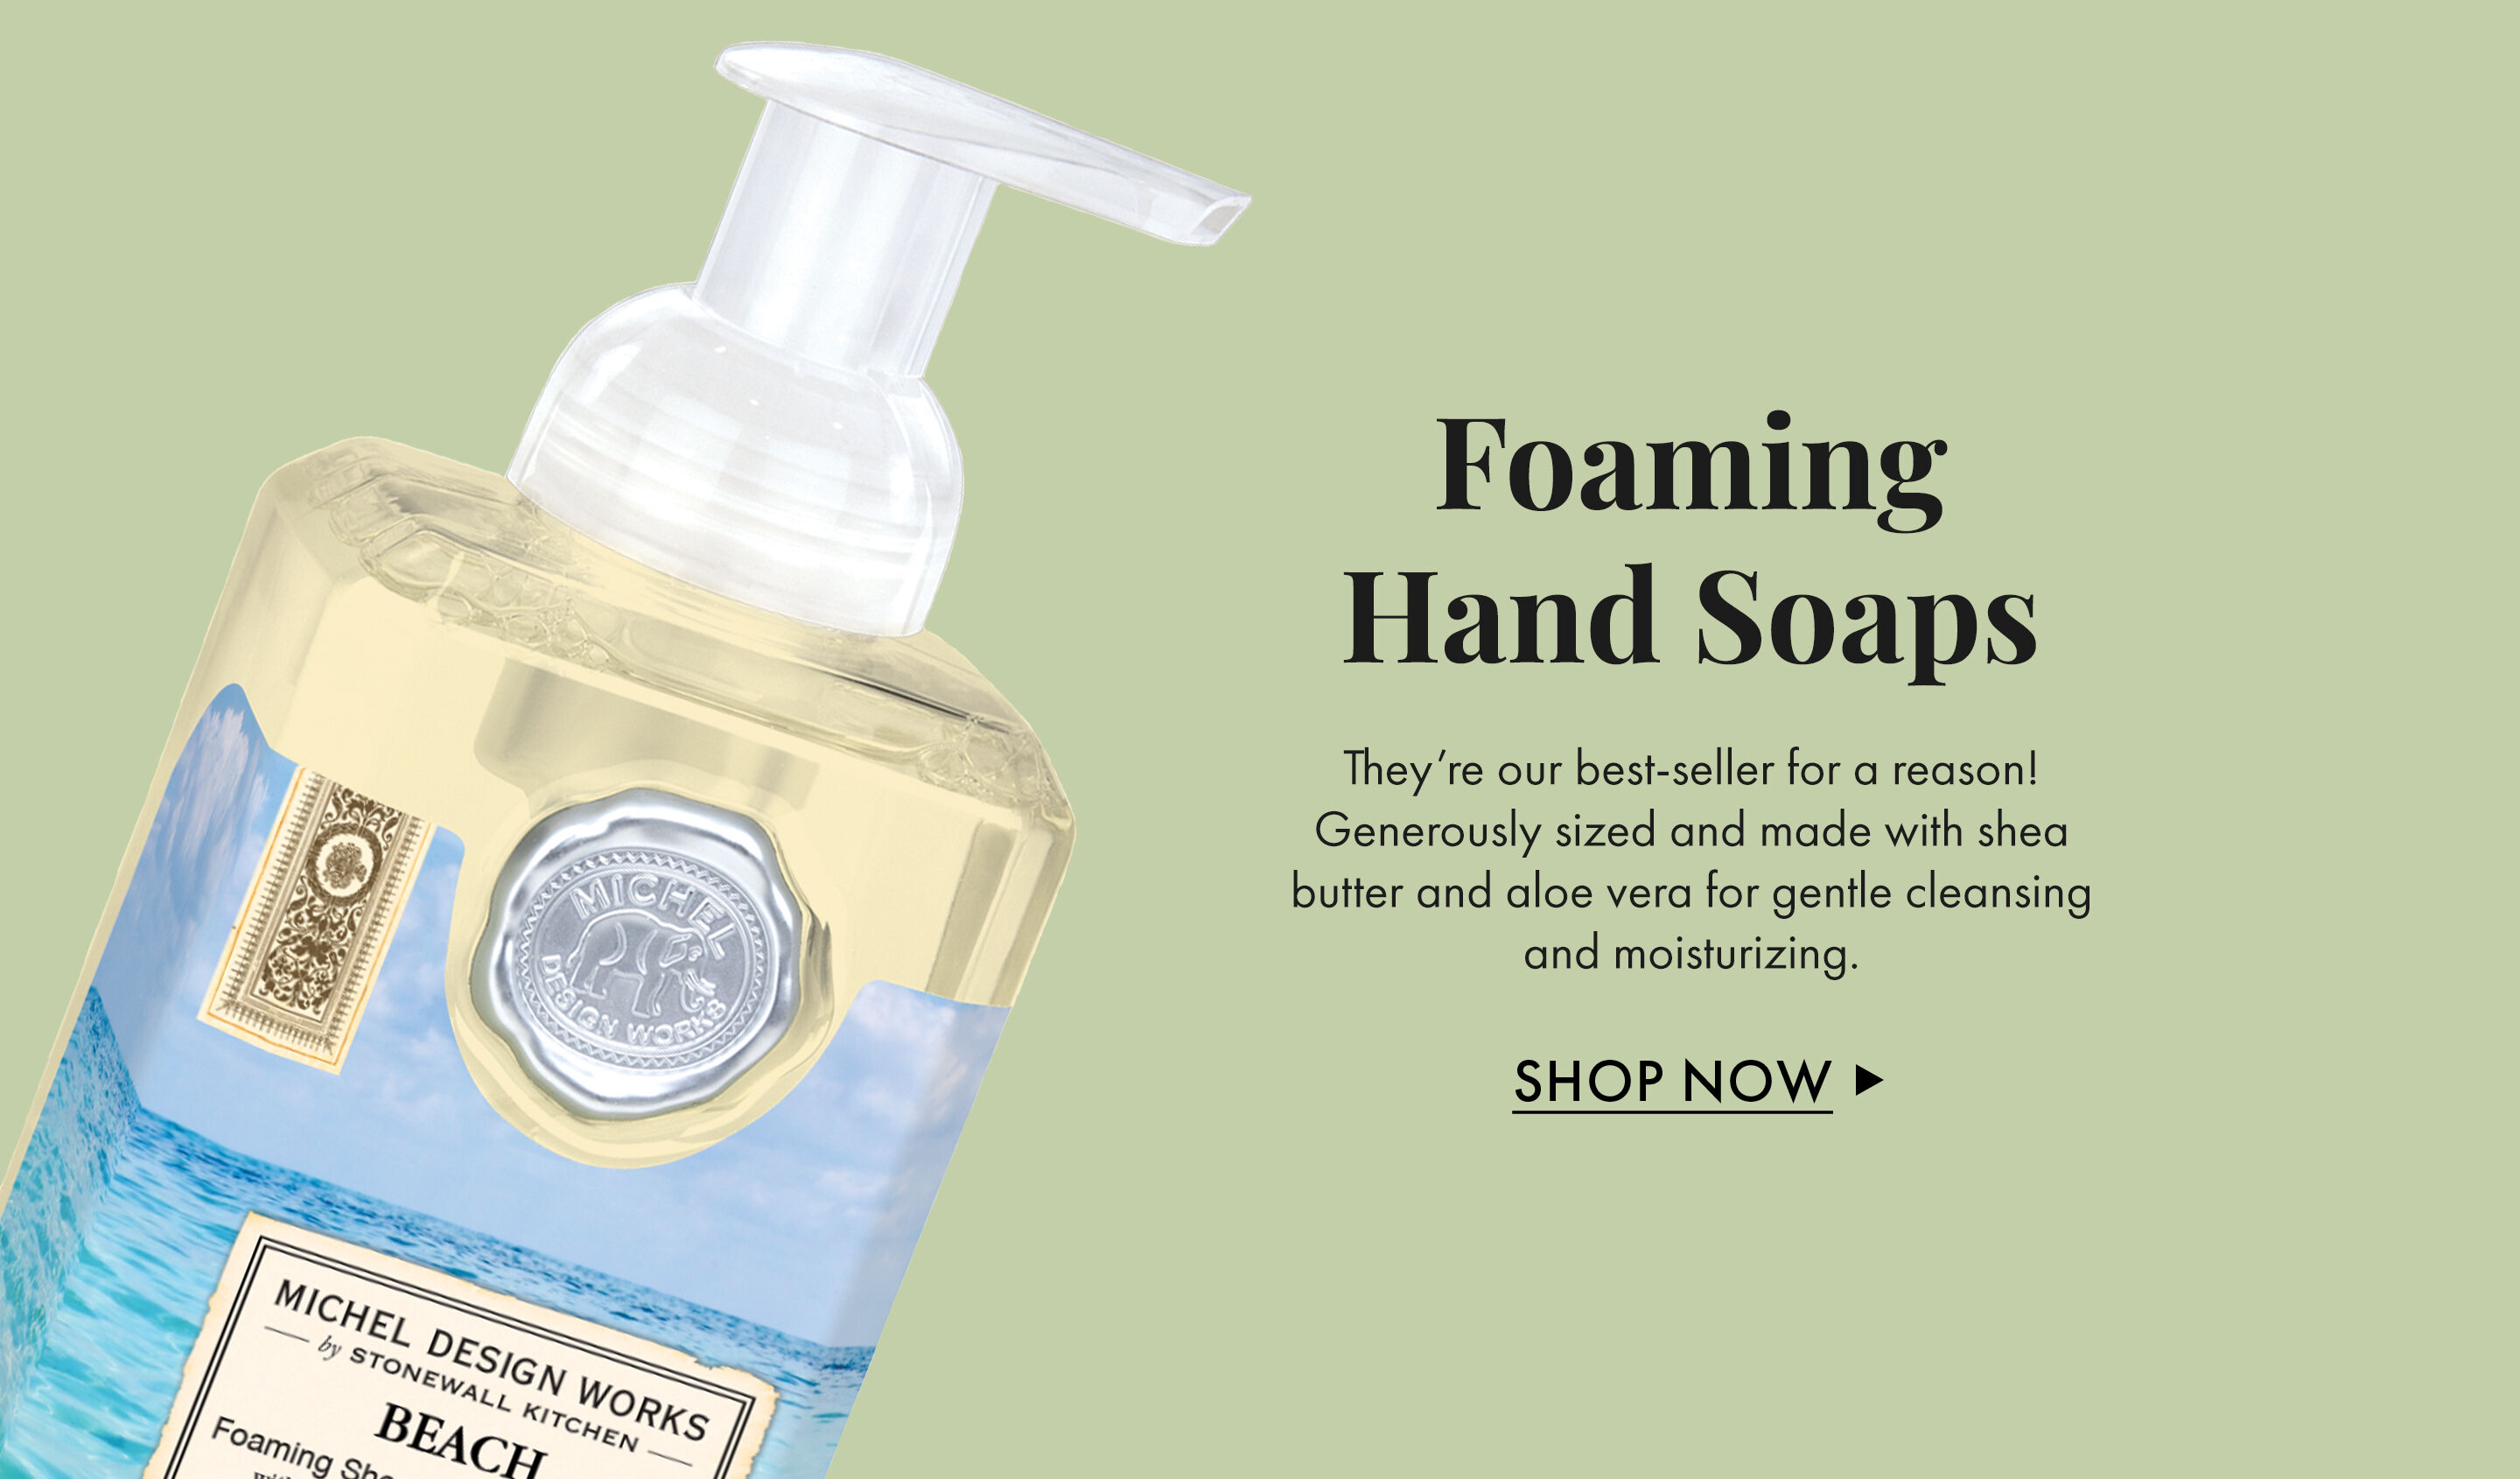 Foaming Hand Soaps | They're our best-seller for a reason! Generously sized and made with shea butter and aloe vera for gentle cleansing and moisturizing. | Shop Now